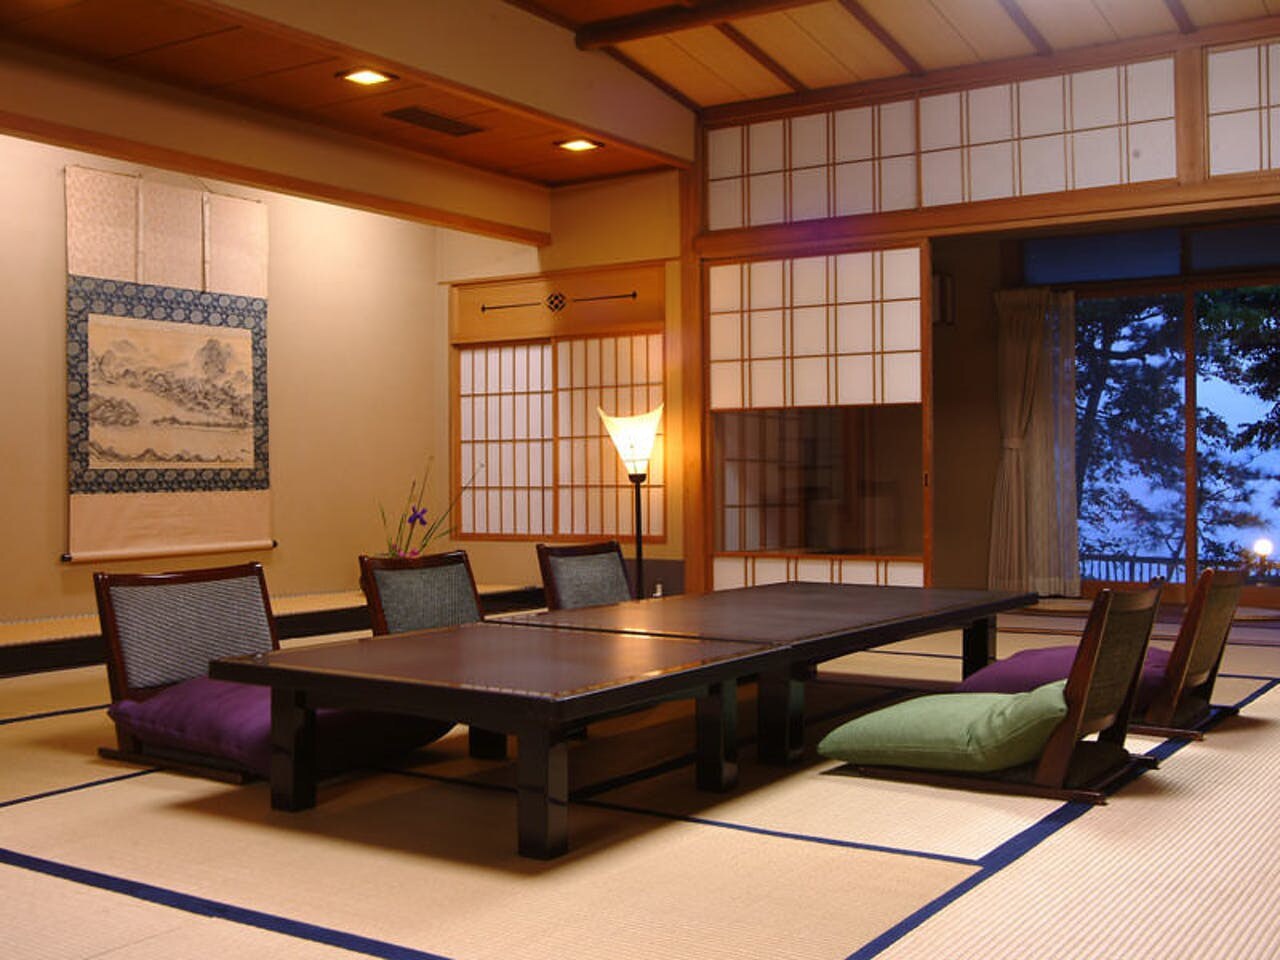 Recommended for groups The spacious and spacious "Treasure" room